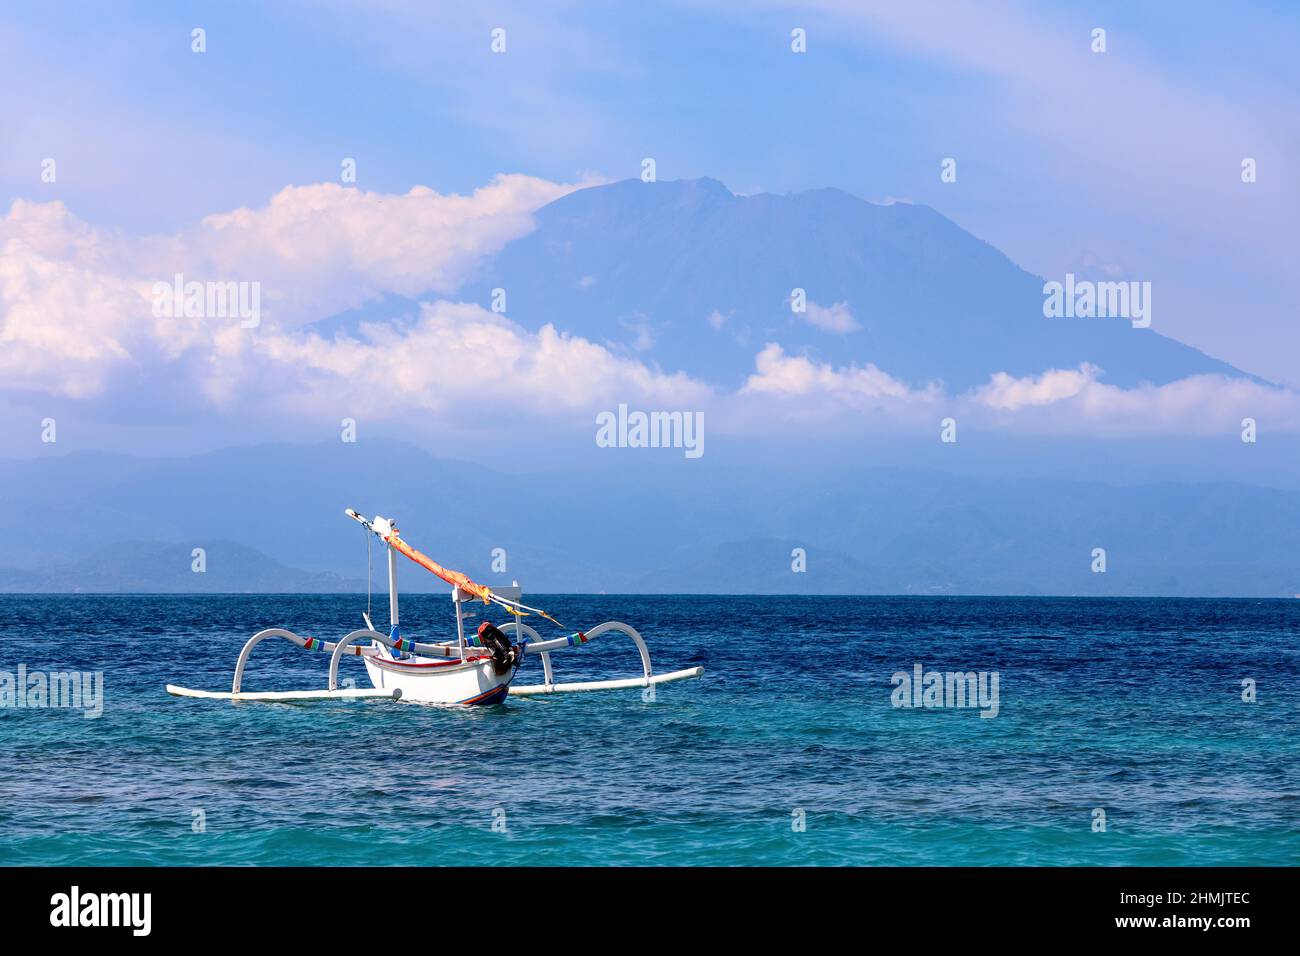 Mount Agung active volcano covered by clouds in Nusa Penida, Bali island, Indonesia. Traditional fishing boats called jukung on the white sand beach. Stock Photo